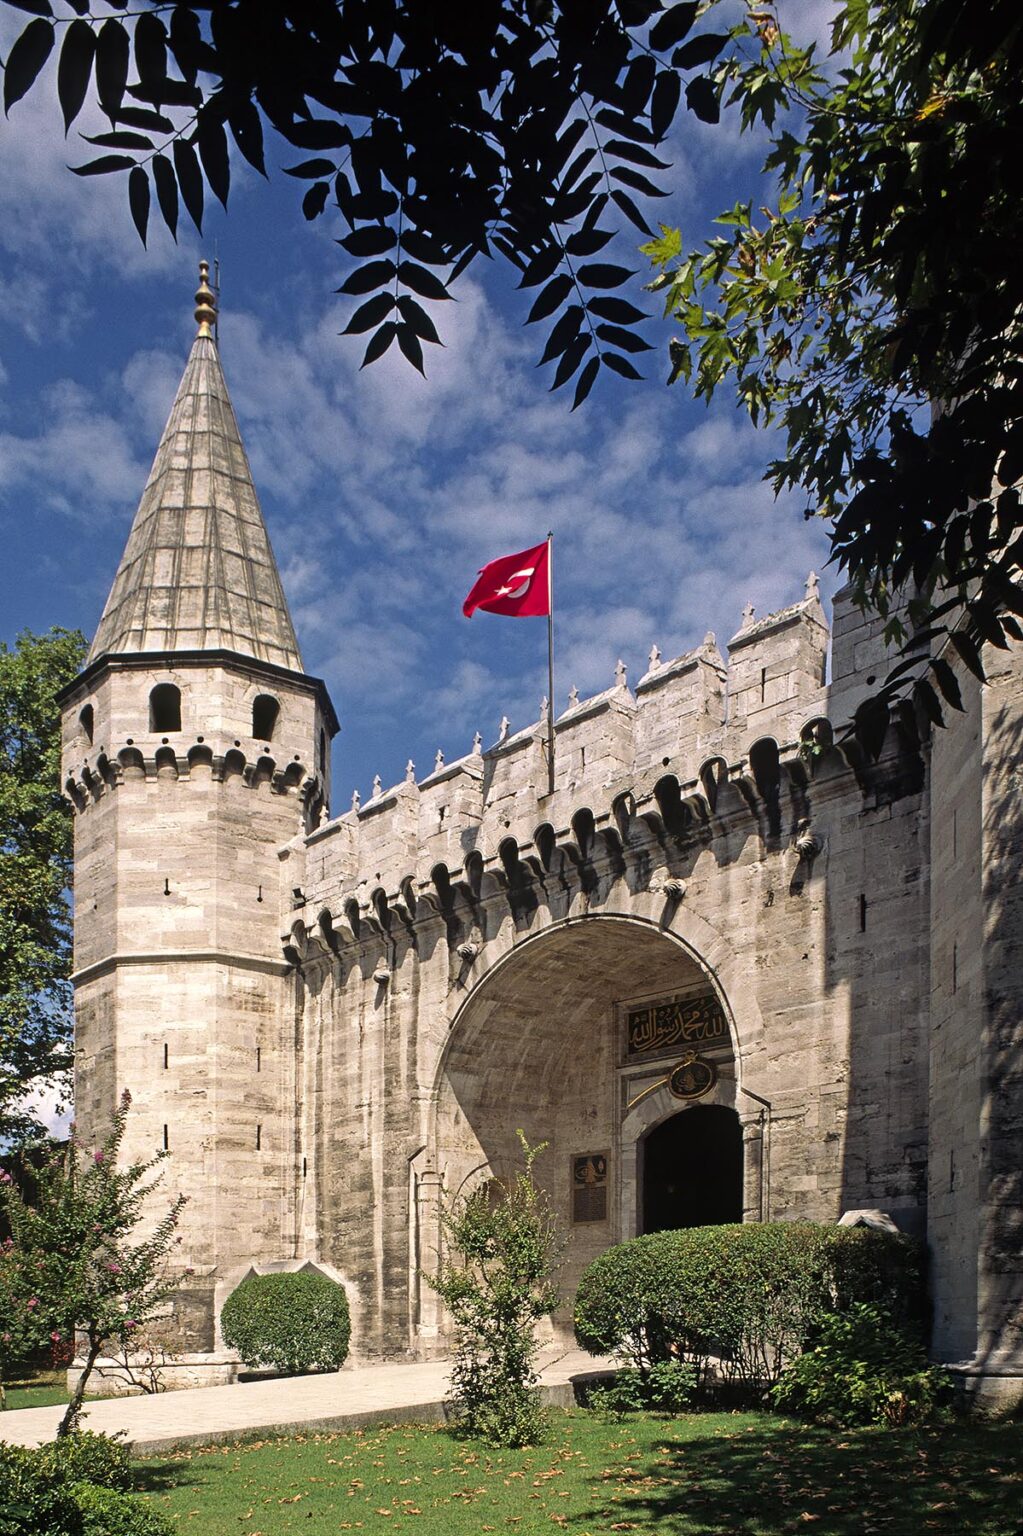 Entry gate to the Topkapi Sarayi (Palace),  now a fabulous museum of Ottoman wealth including the Sultans Treasury & Harem - Istanbul, Turkey